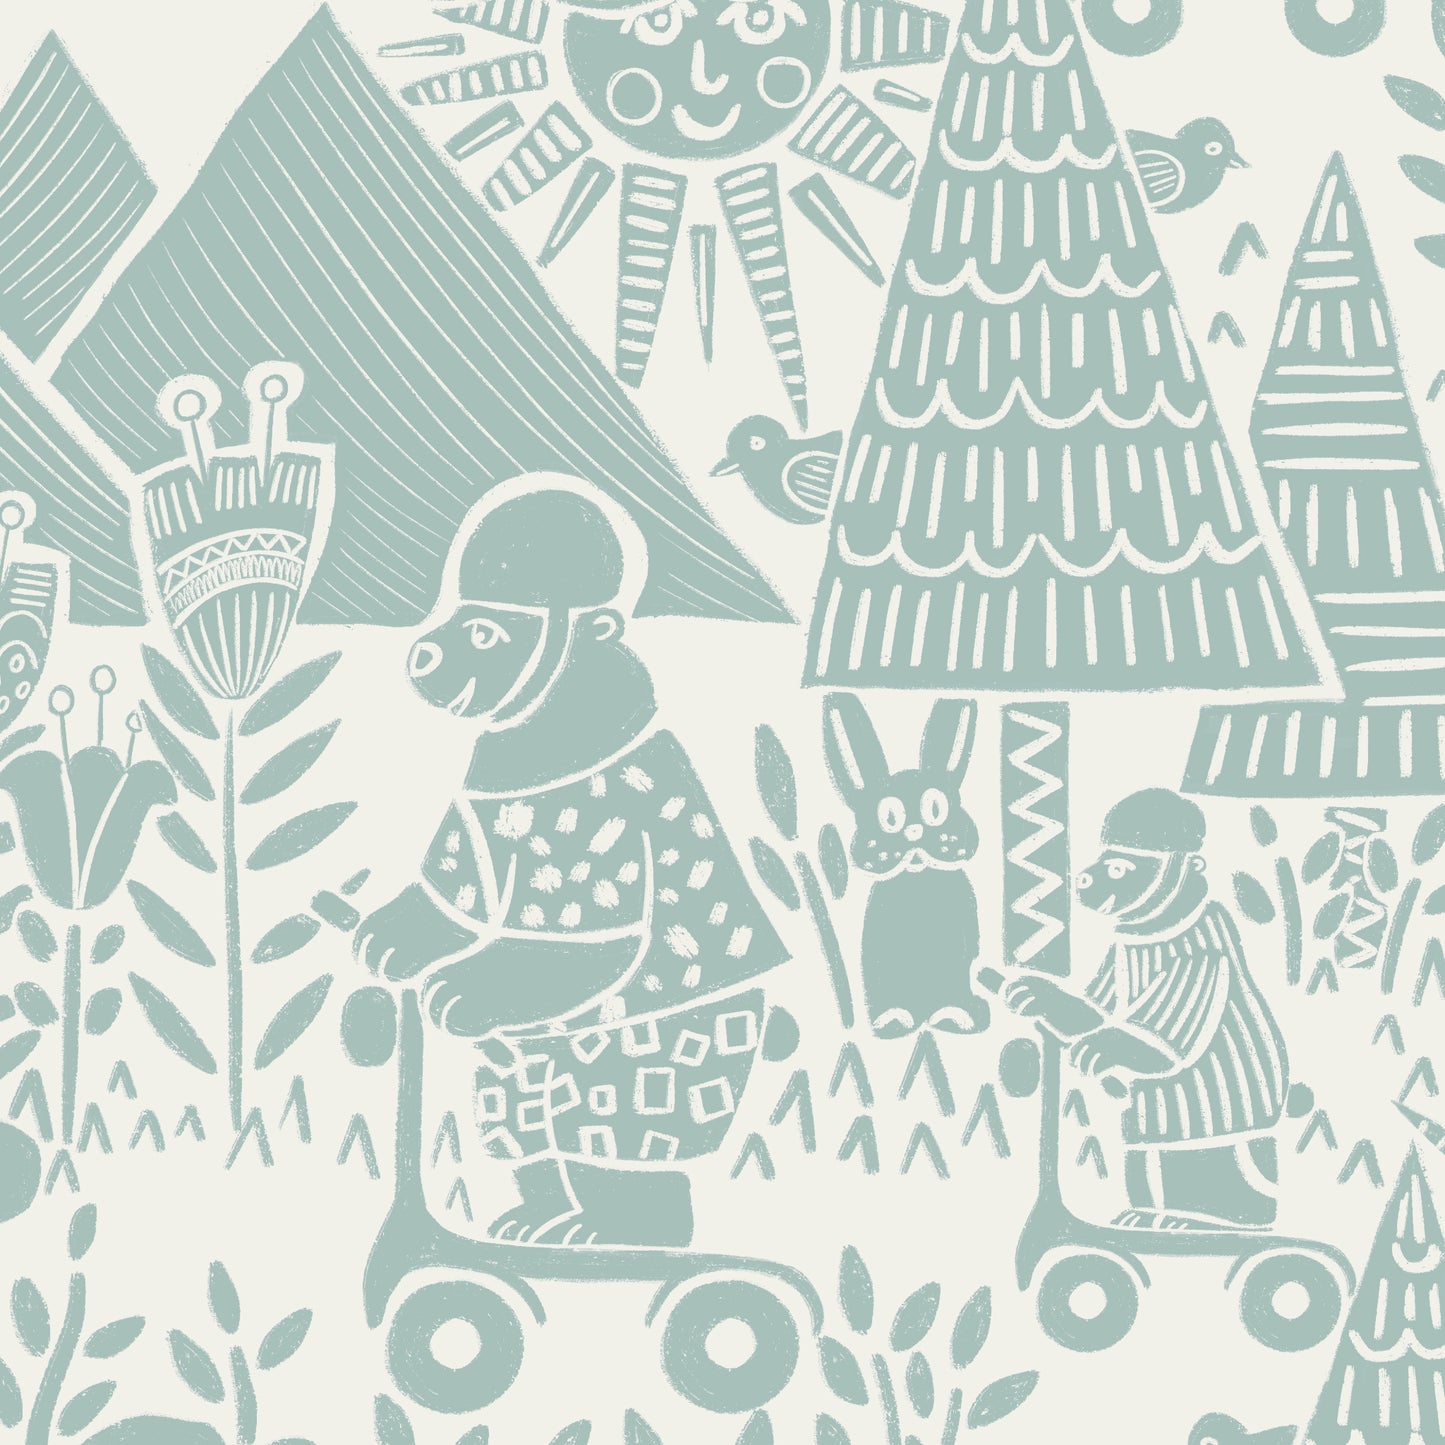 Scooting Bears Wallpaper in Sea Green shown in a close up view.